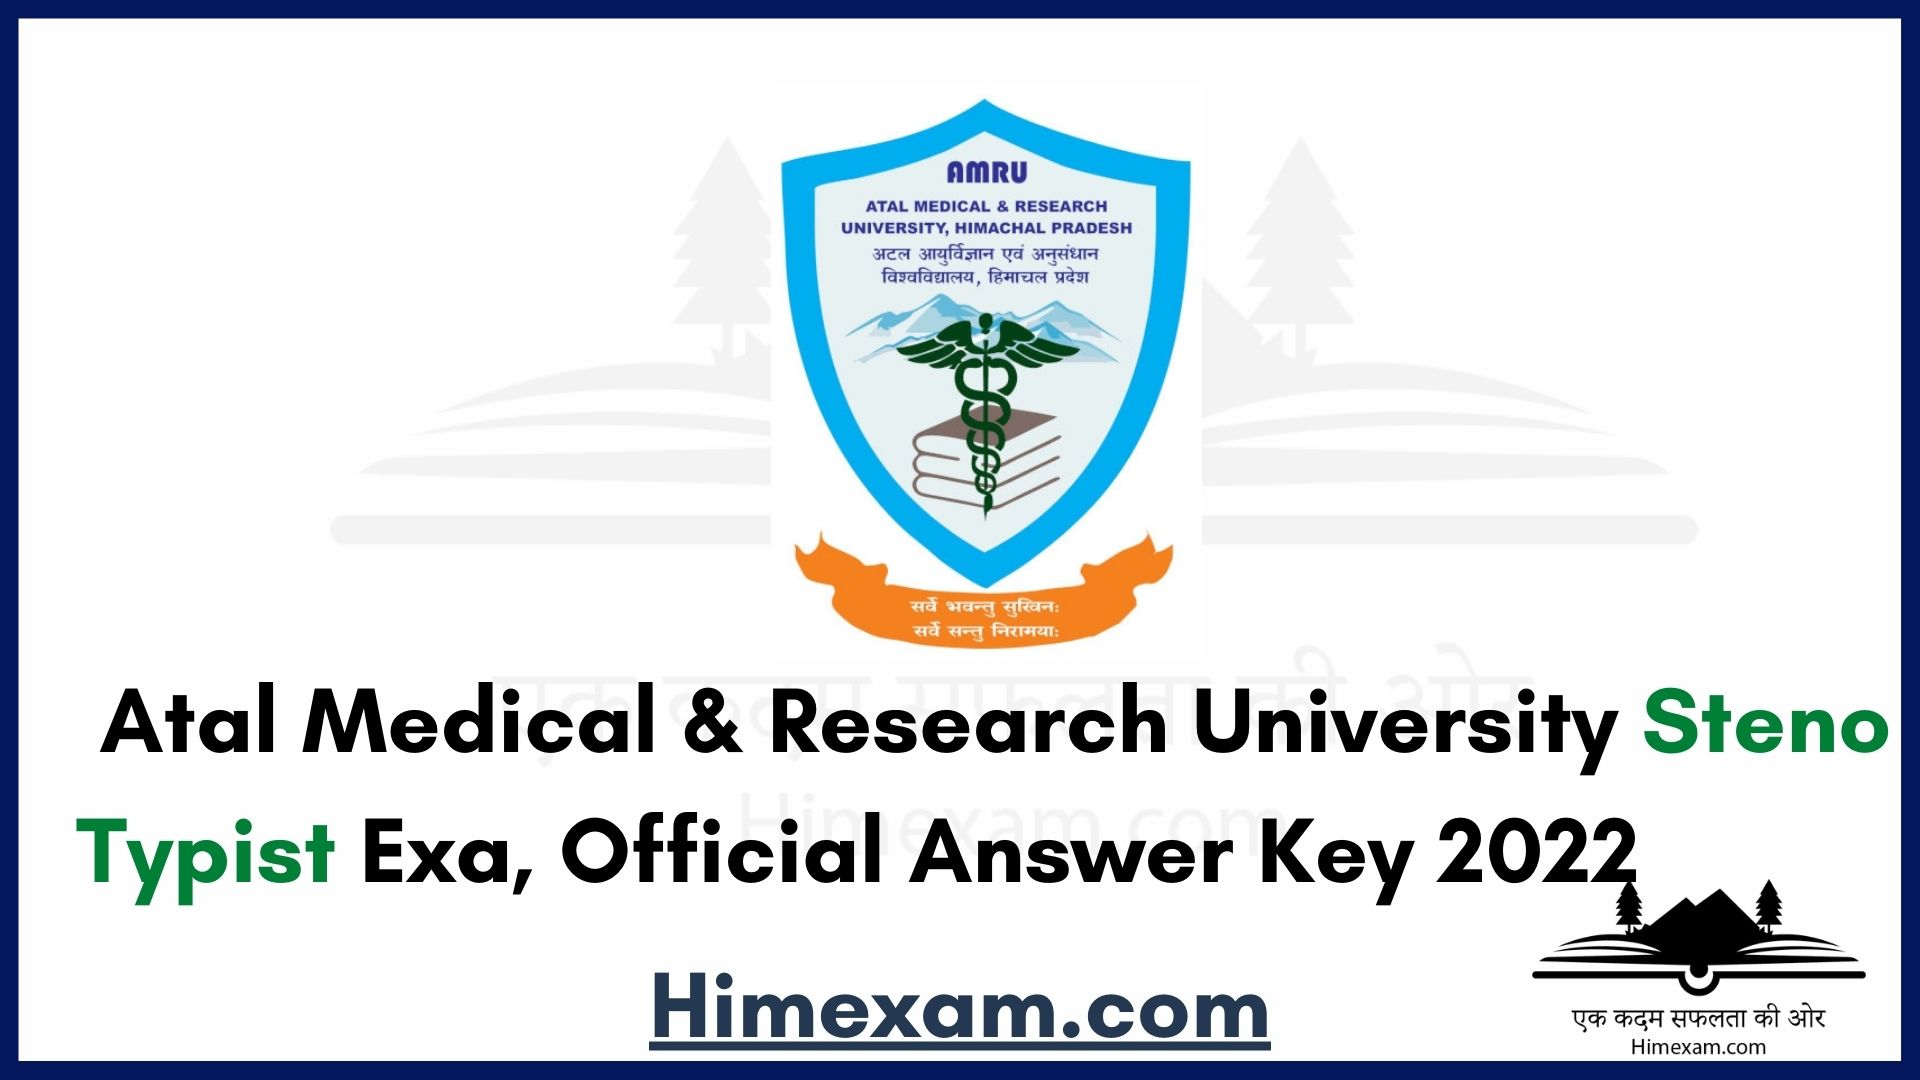 Atal Medical & Research University Steno Typist Exam Official  Answer Key 2022